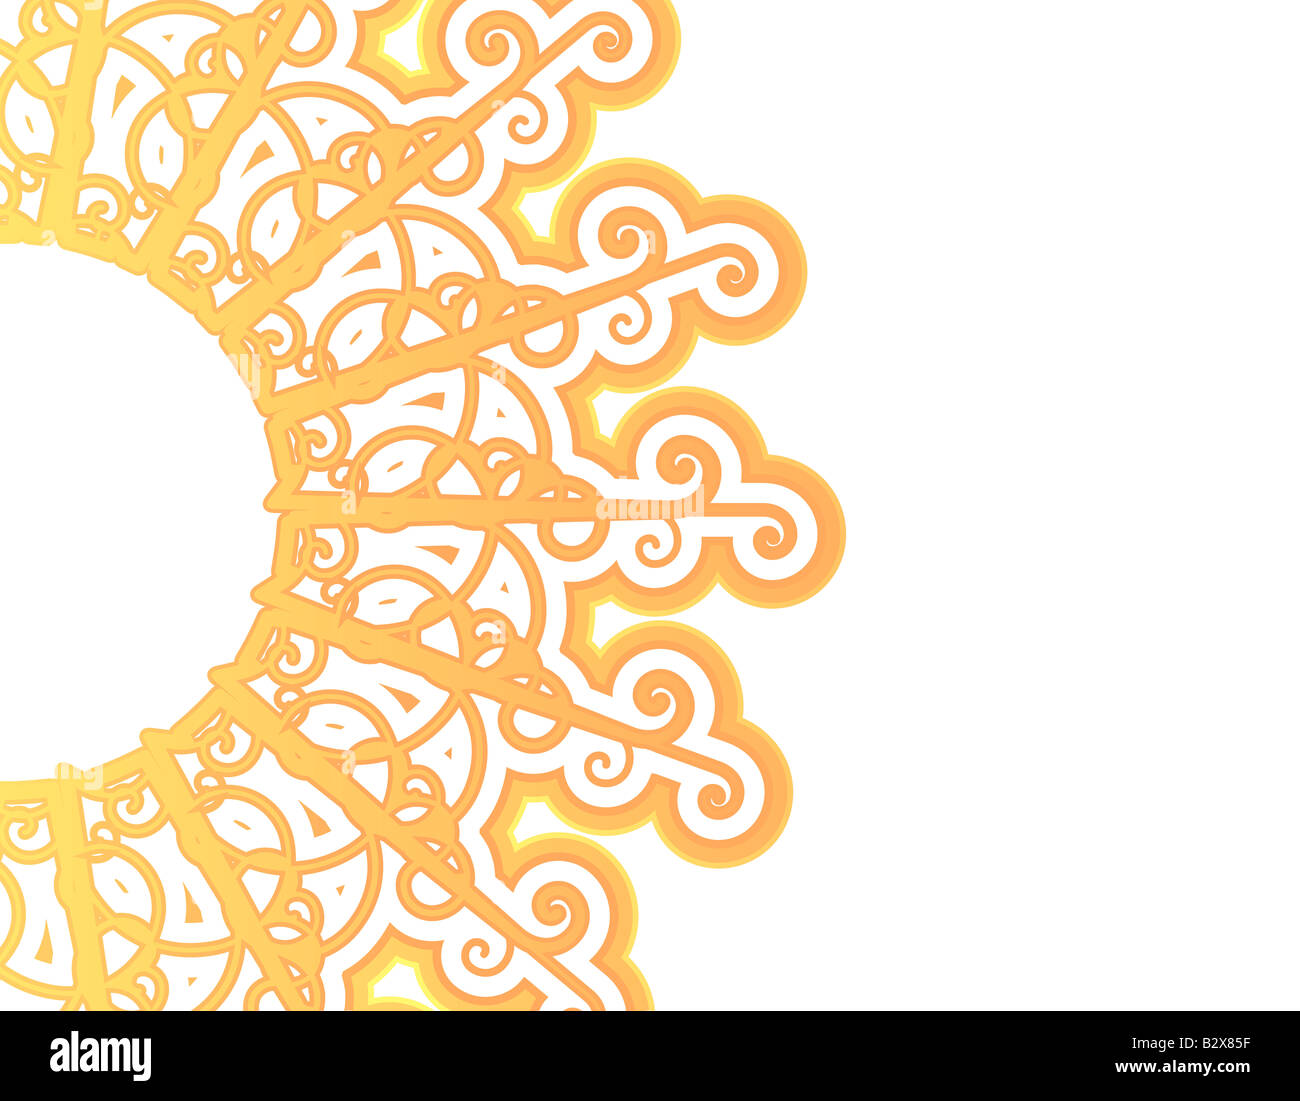 Vector illustration of a sunny abstract swirls background in orange colors Stock Photo